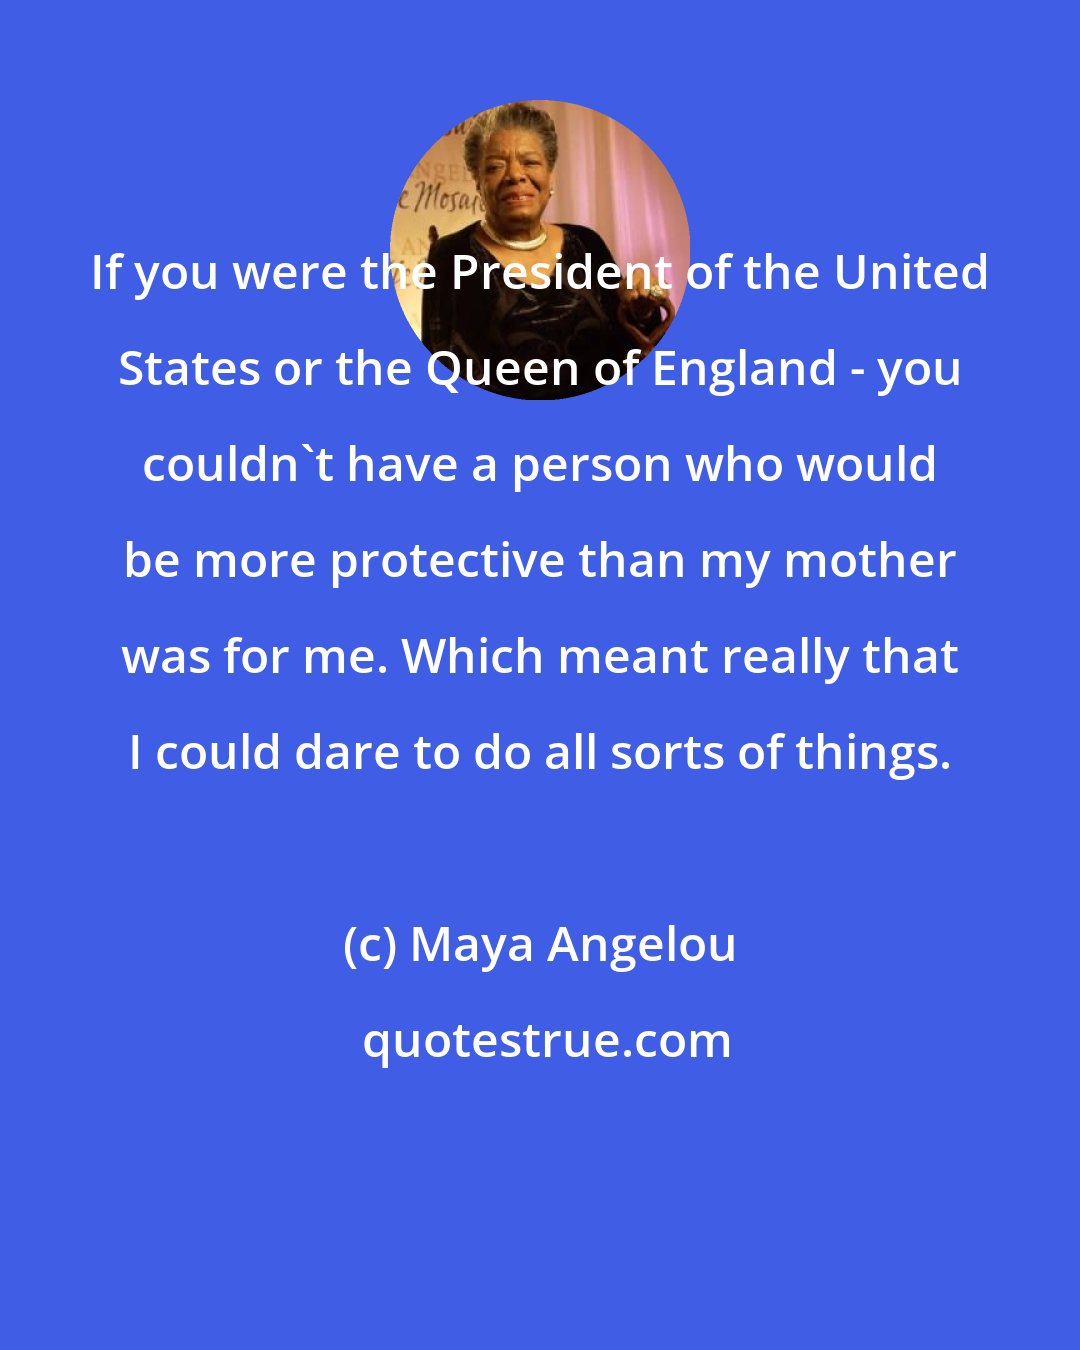 Maya Angelou: If you were the President of the United States or the Queen of England - you couldn't have a person who would be more protective than my mother was for me. Which meant really that I could dare to do all sorts of things.